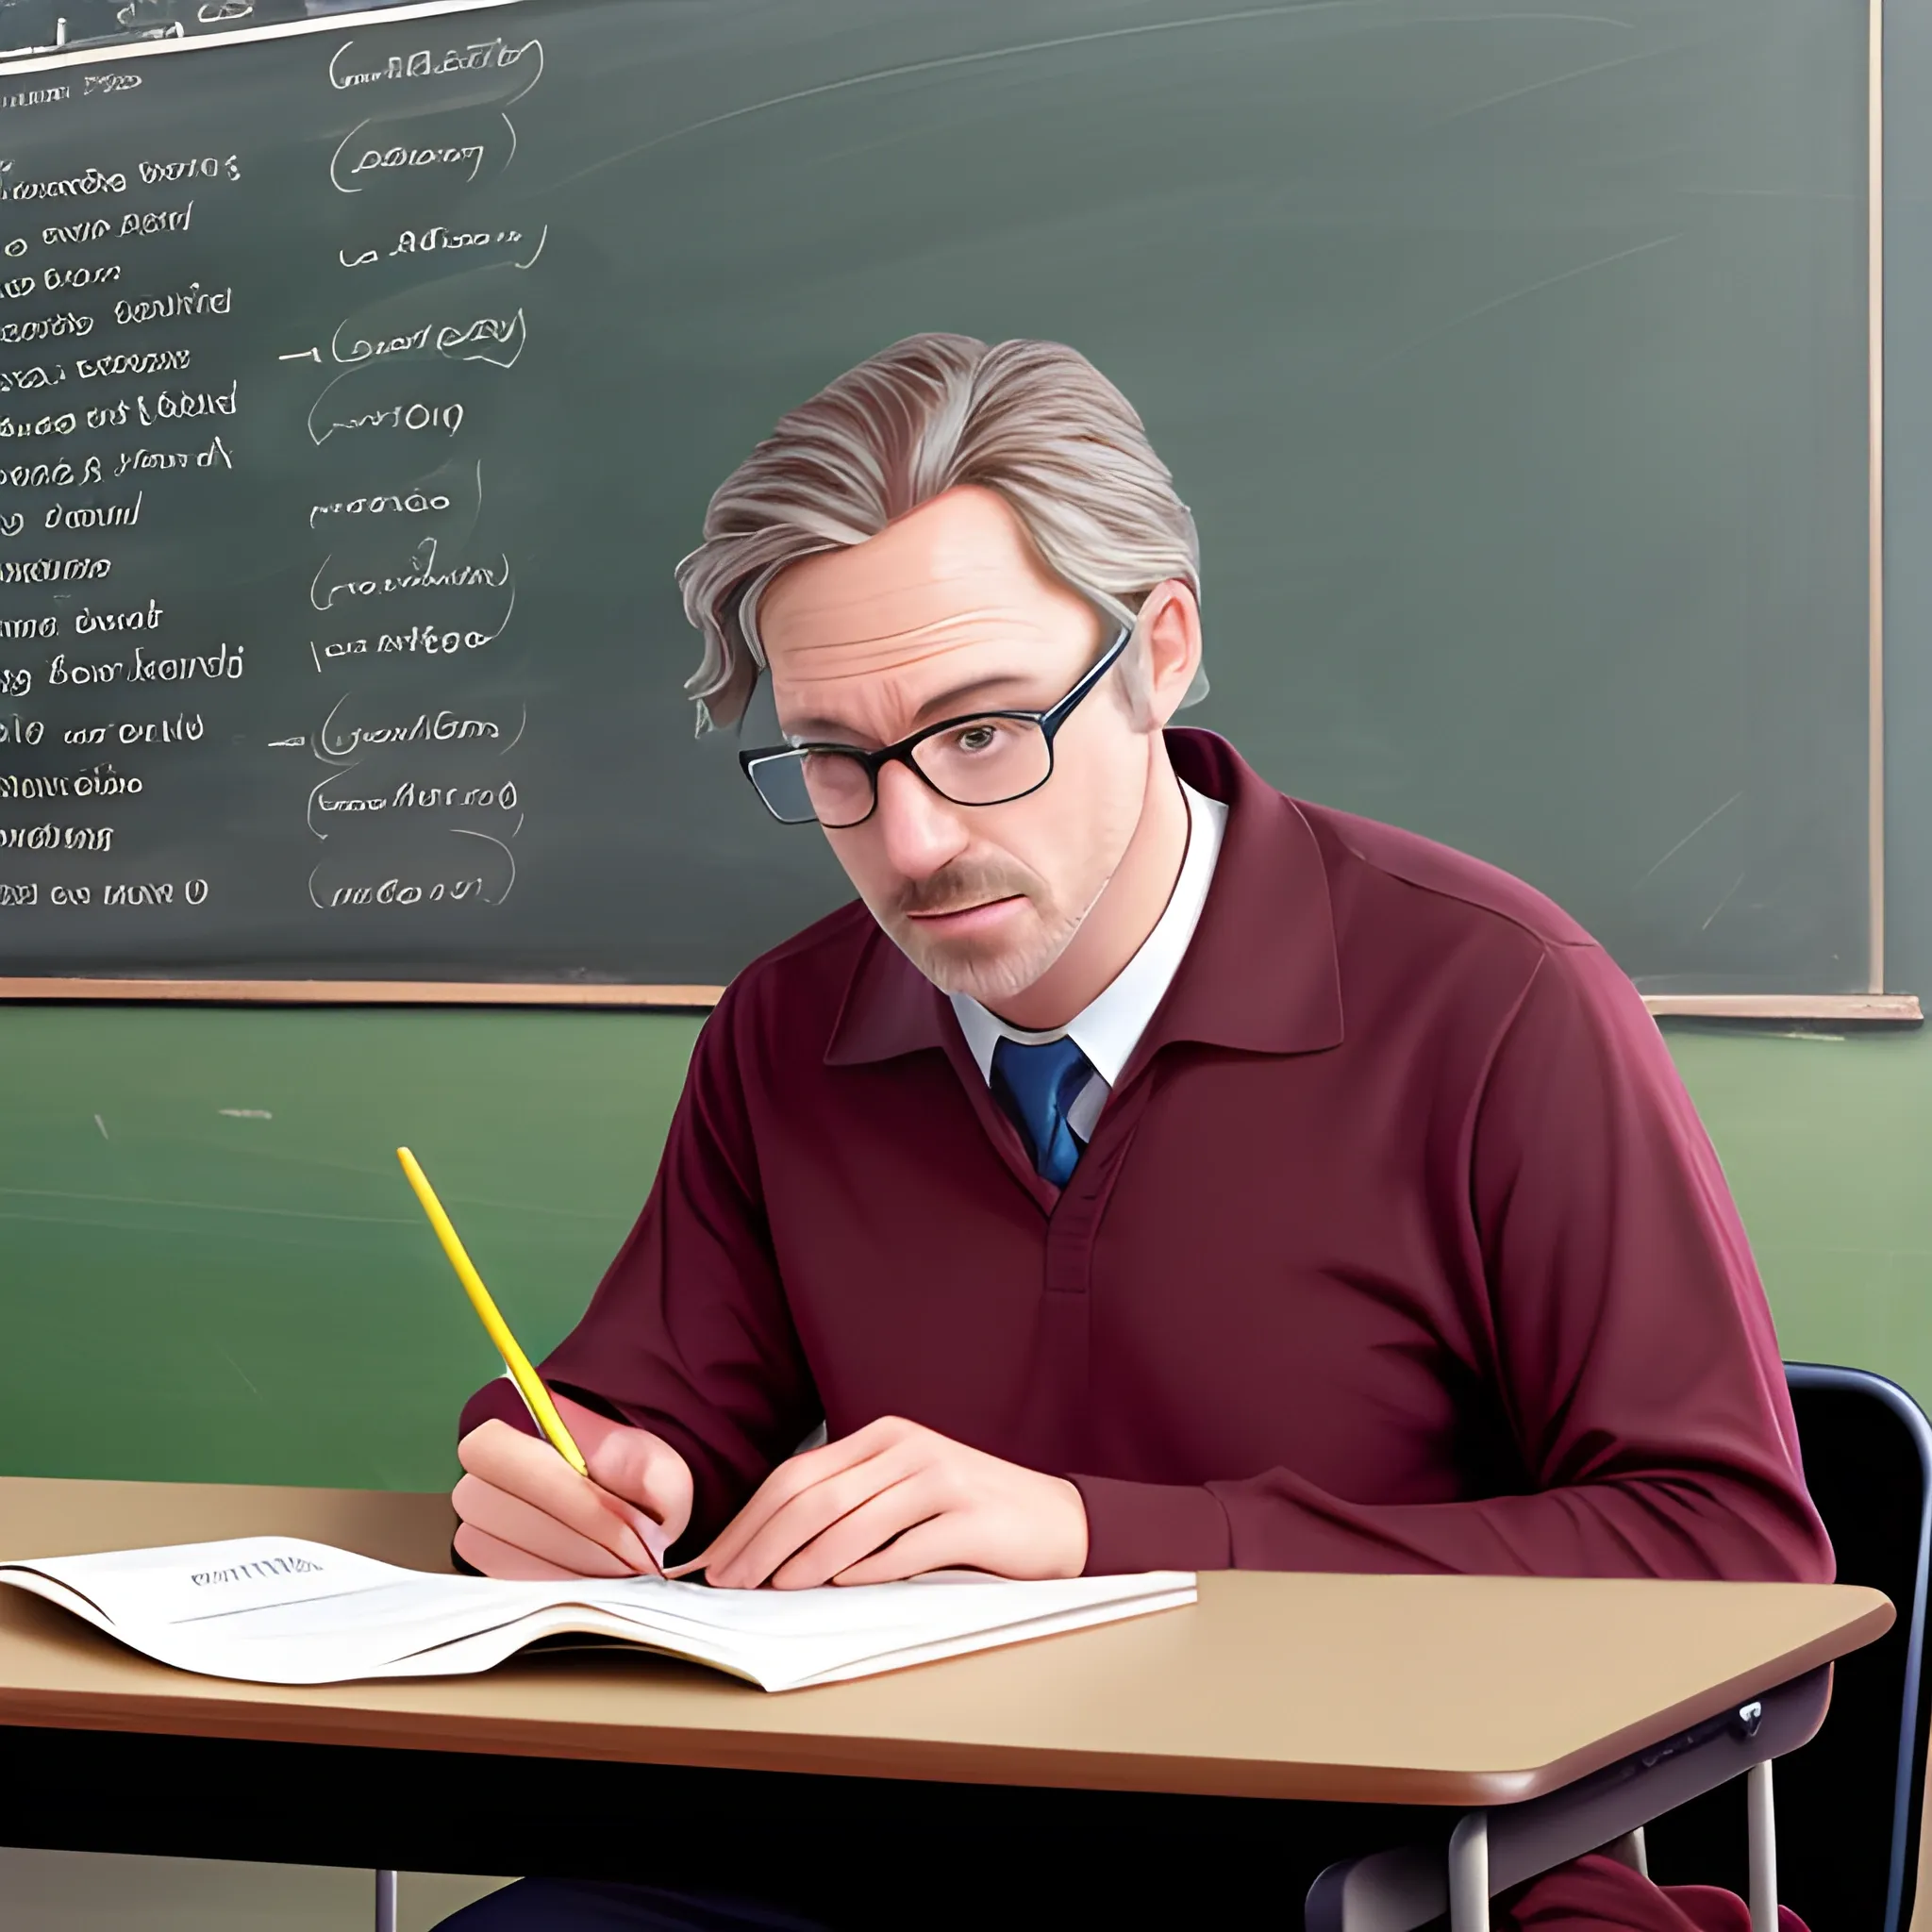 hyper-realistic image of a teacher using ChatGPT